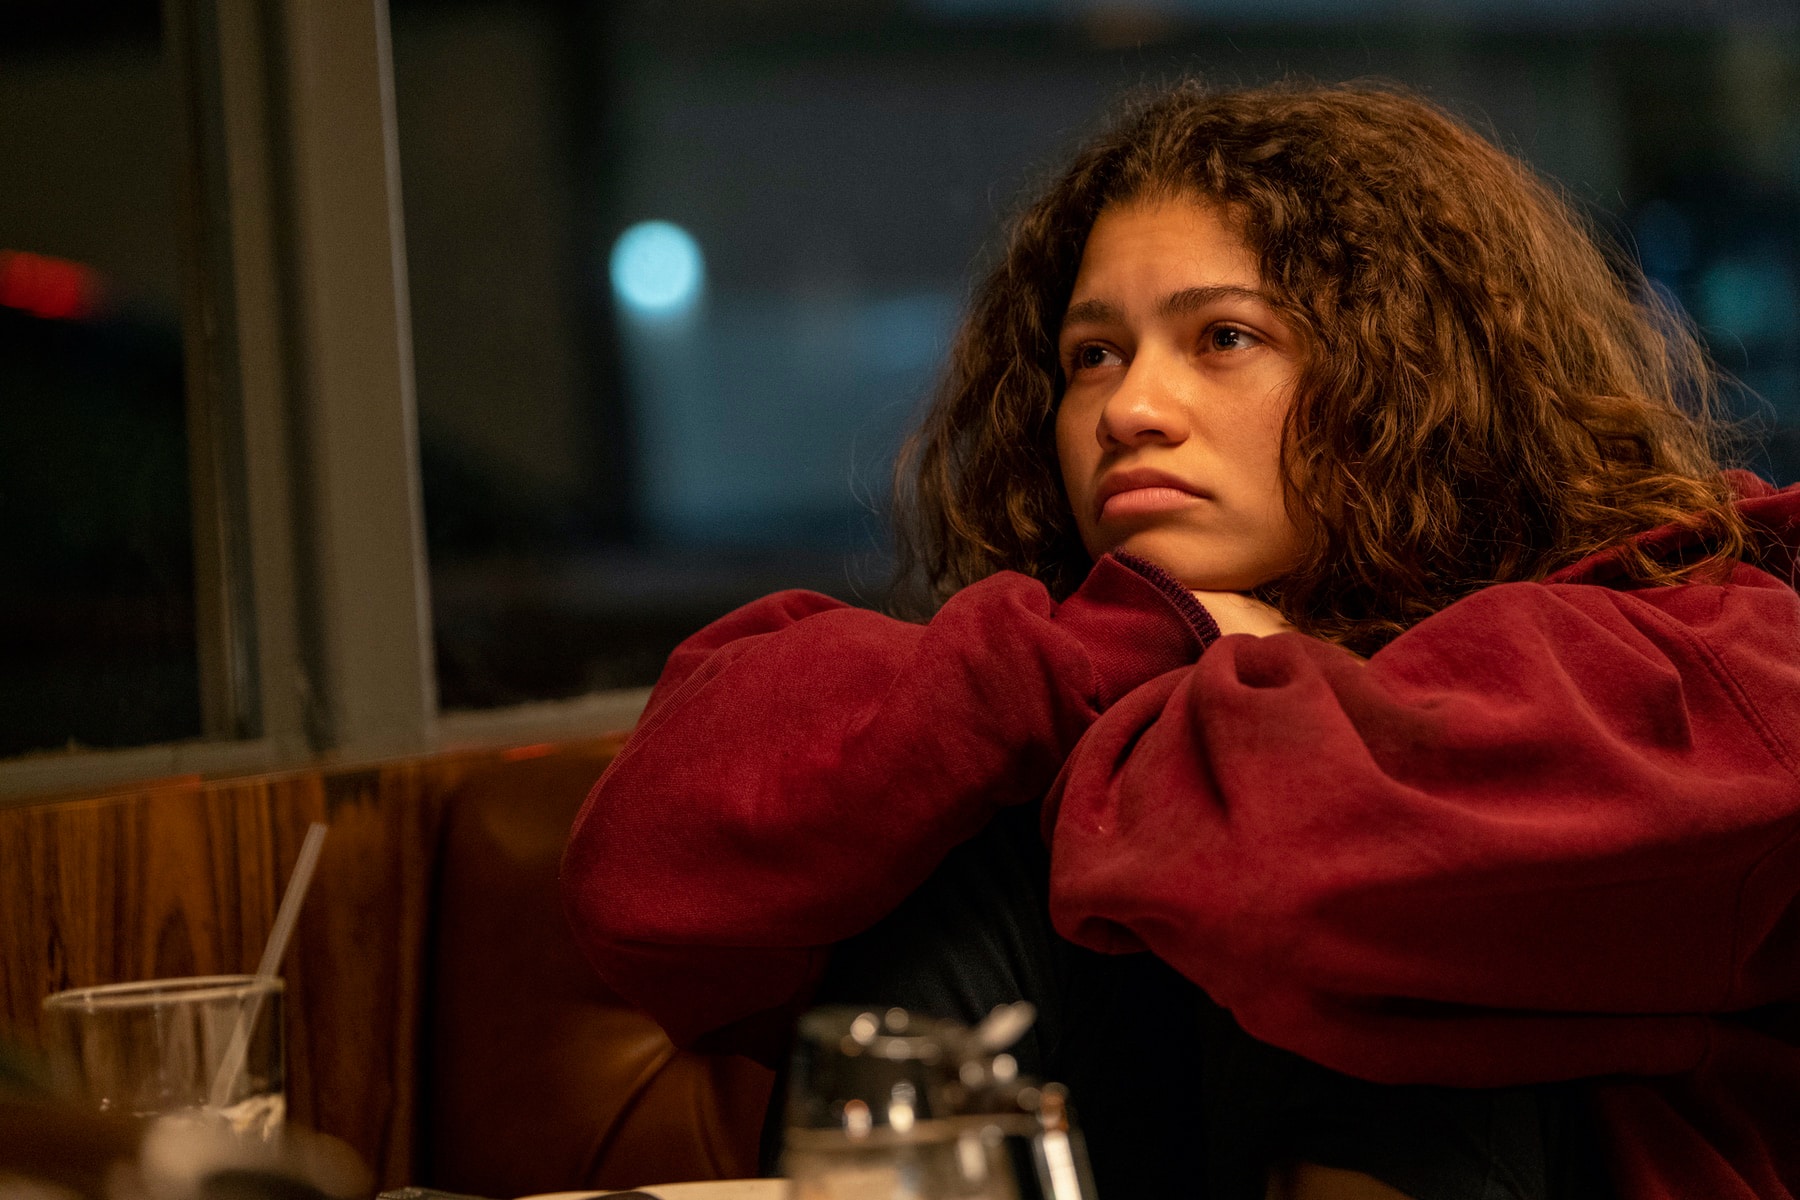 Rue Asexual Bisexual or Lesbian in Euphoria